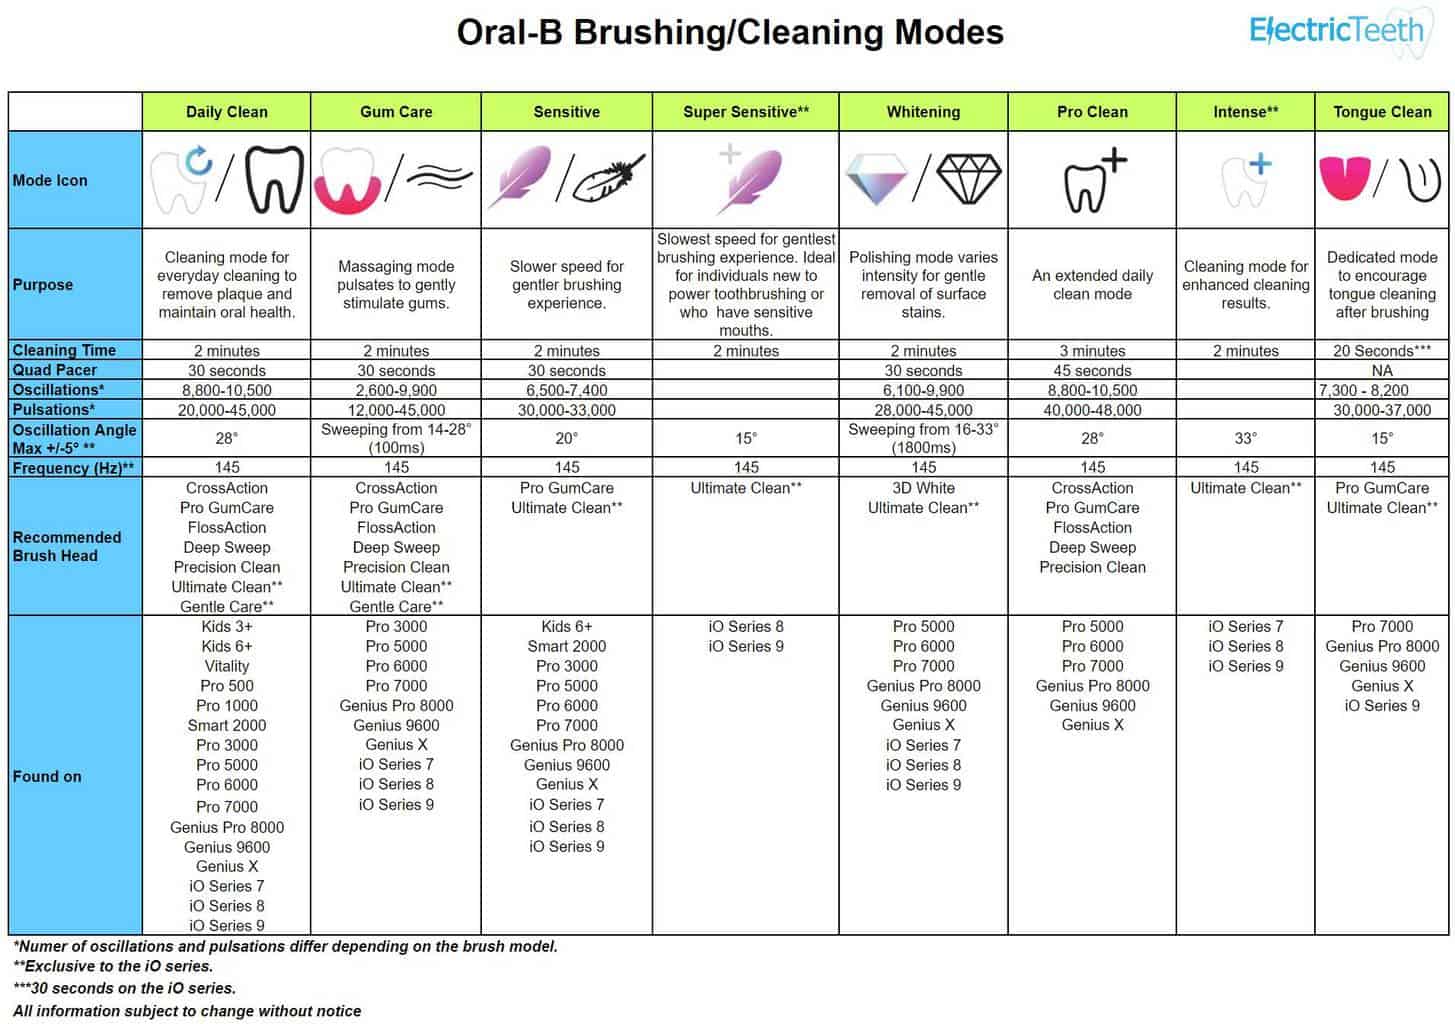 forgetful Ten years Money lending Oral-B cleaning modes explained - Electric Teeth